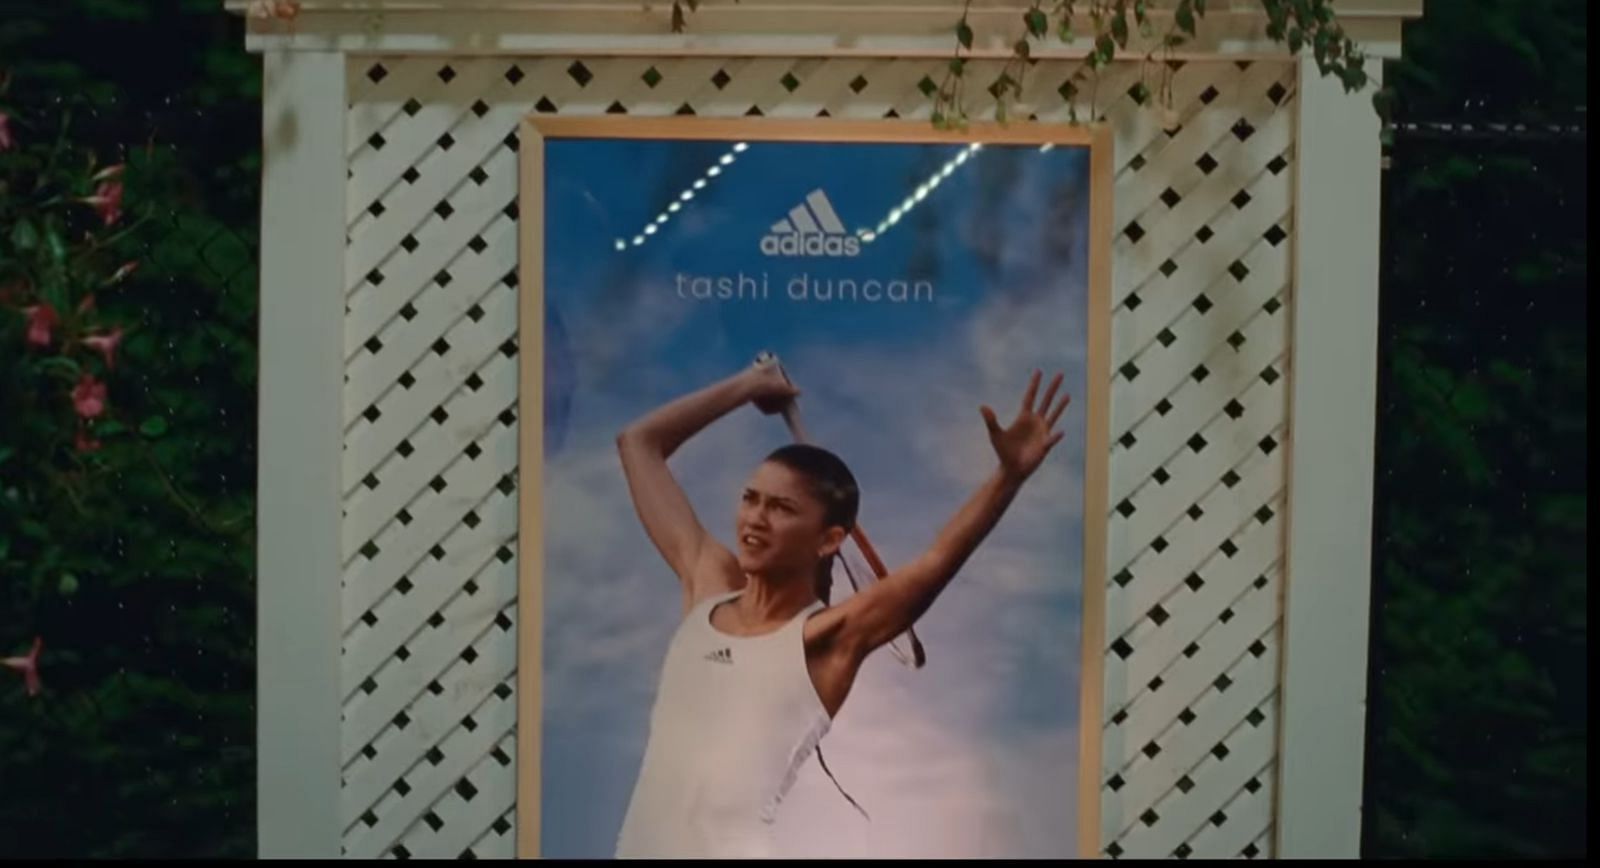 Is Tashi Duncan, played by Zendaya in the movie Challengers, a real person? (Image by Warner Bros)